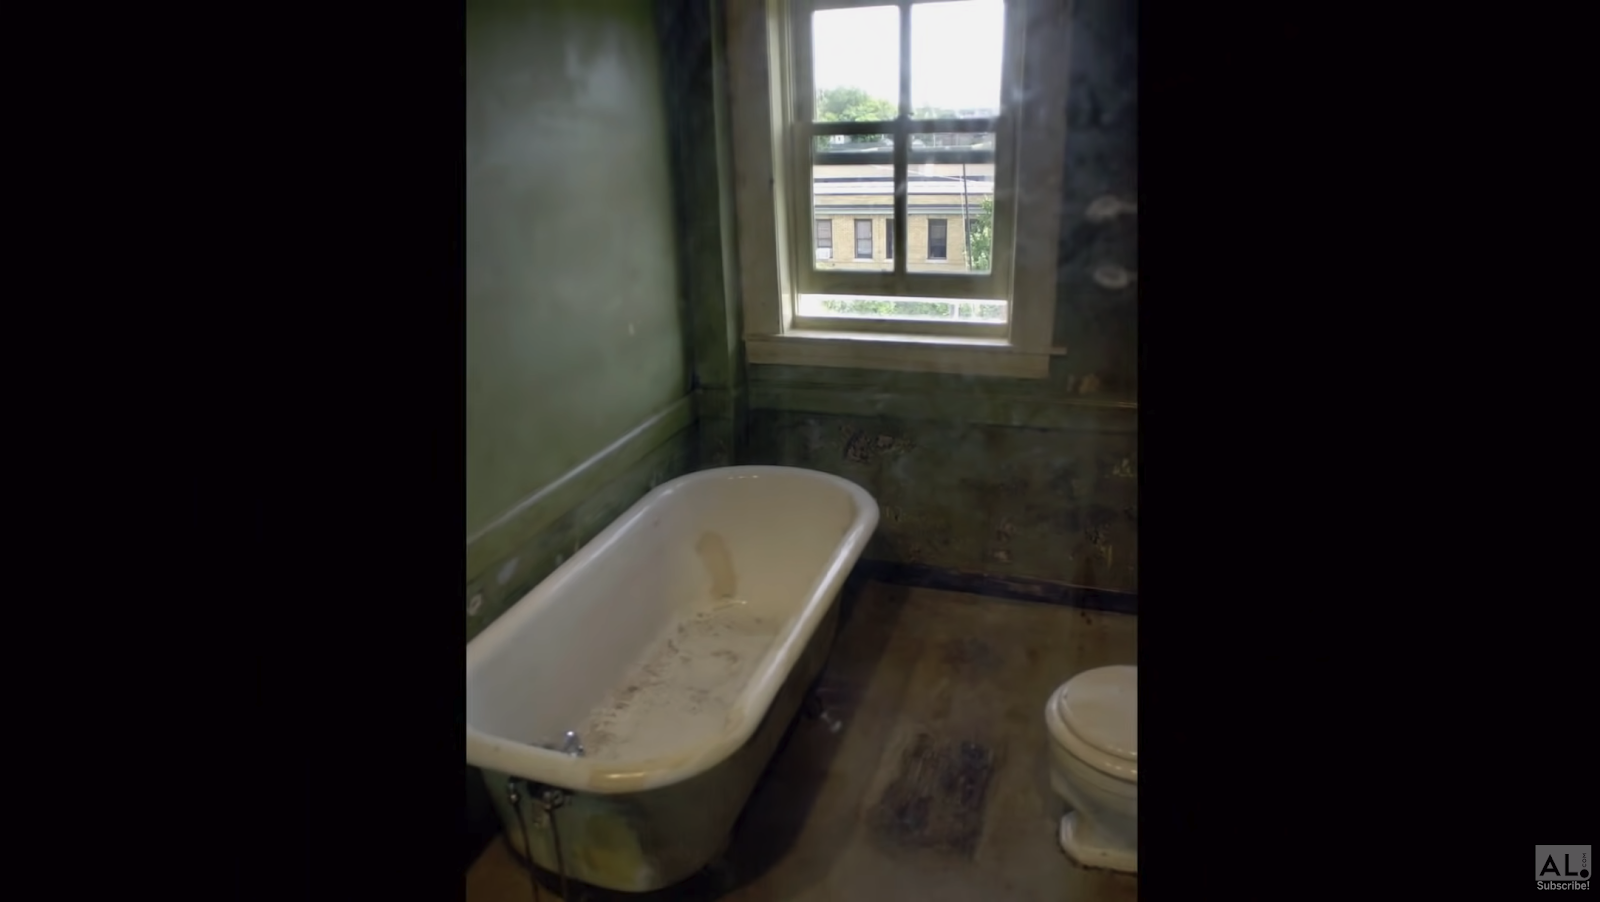 A bathroom with a tub toilet and a window

Description automatically generated